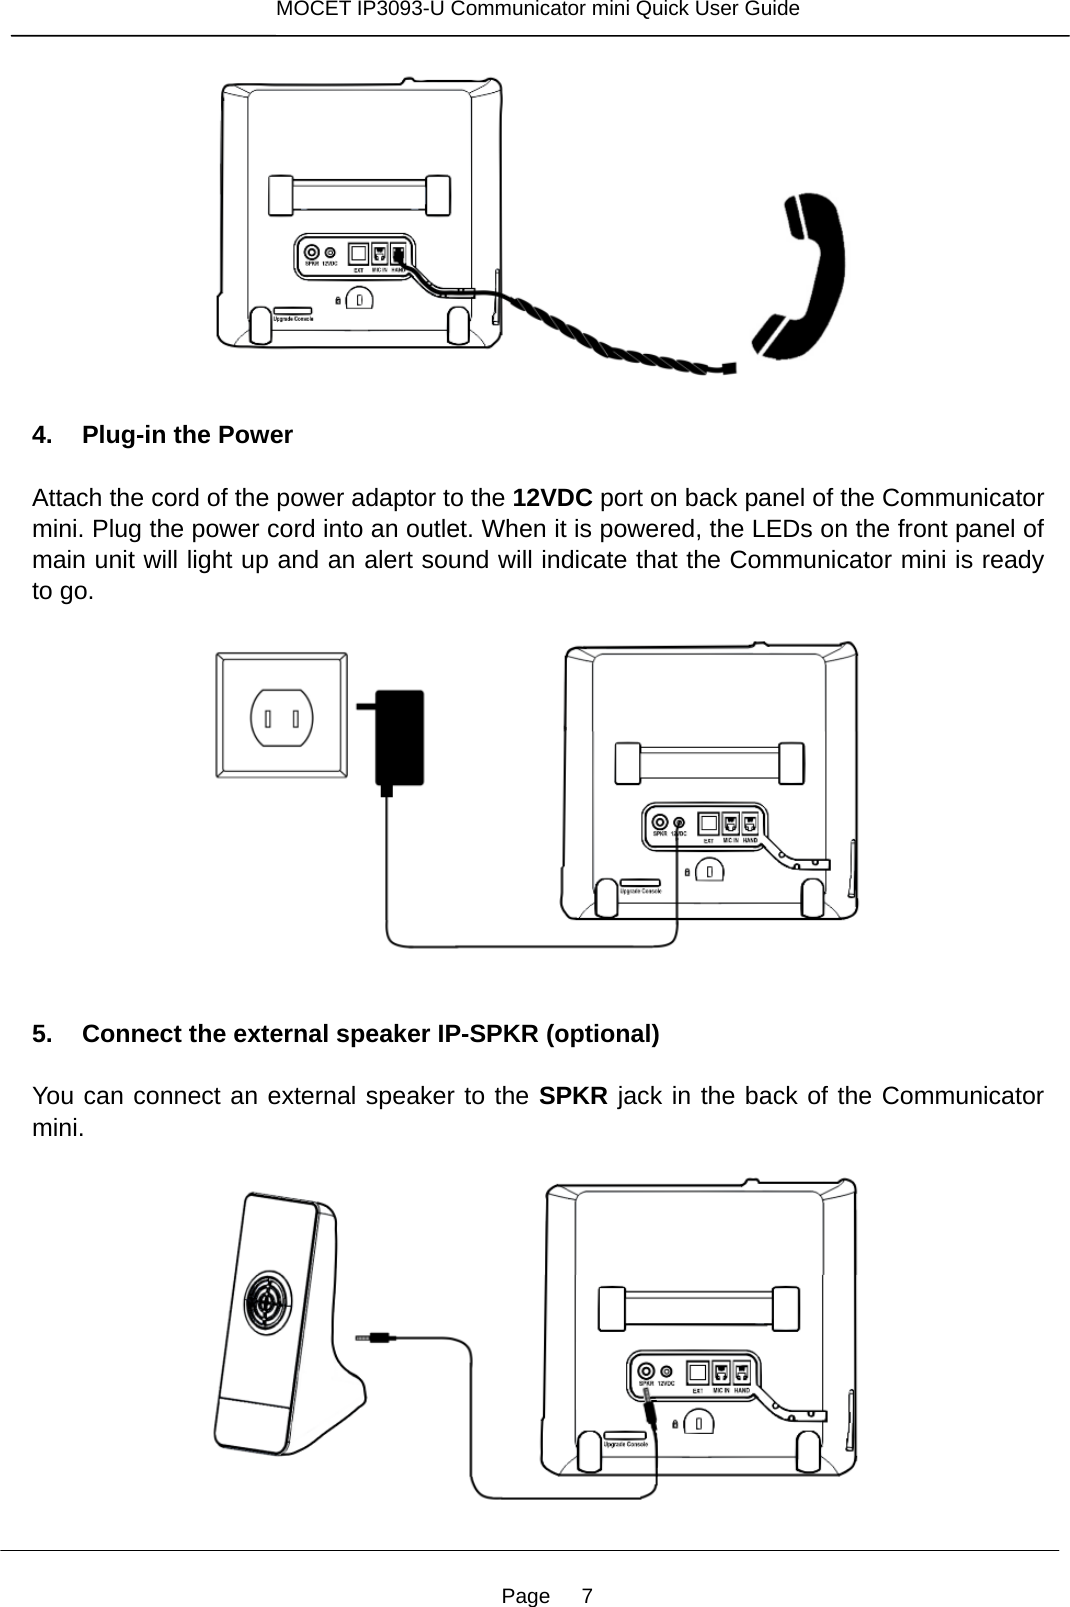 Page   7 MOCET IP3093-U Communicator mini Quick User Guide    4. Plug-in the Power  Attach the cord of the power adaptor to the 12VDC port on back panel of the Communicator mini. Plug the power cord into an outlet. When it is powered, the LEDs on the front panel of main unit will light up and an alert sound will indicate that the Communicator mini is ready to go.      5. Connect the external speaker IP-SPKR (optional)  You can connect an external speaker to the SPKR jack in the back of the Communicator mini.   